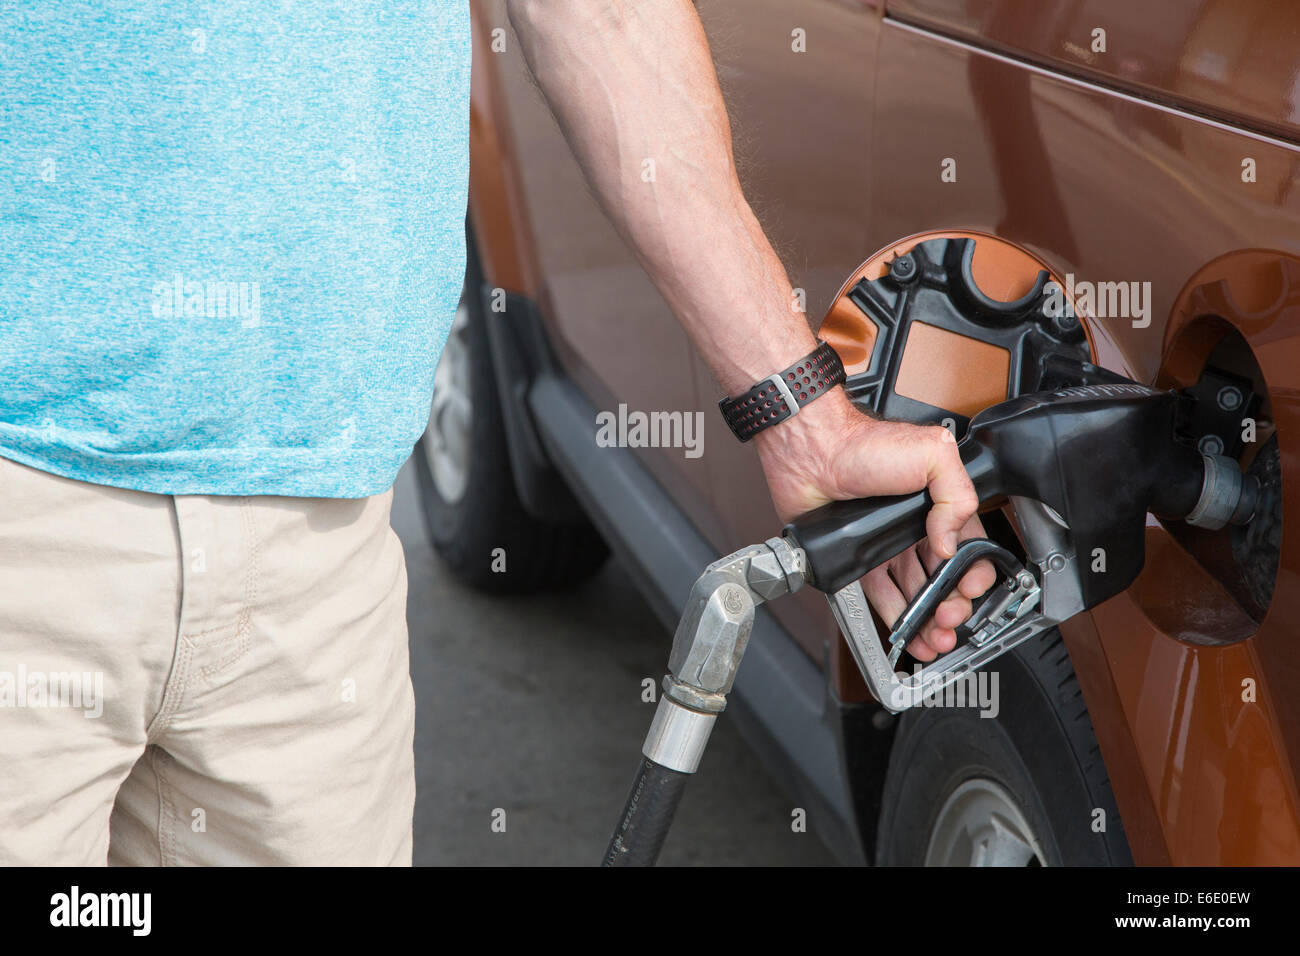 Man pumping fuel into his vehicle at service station Stock Photo